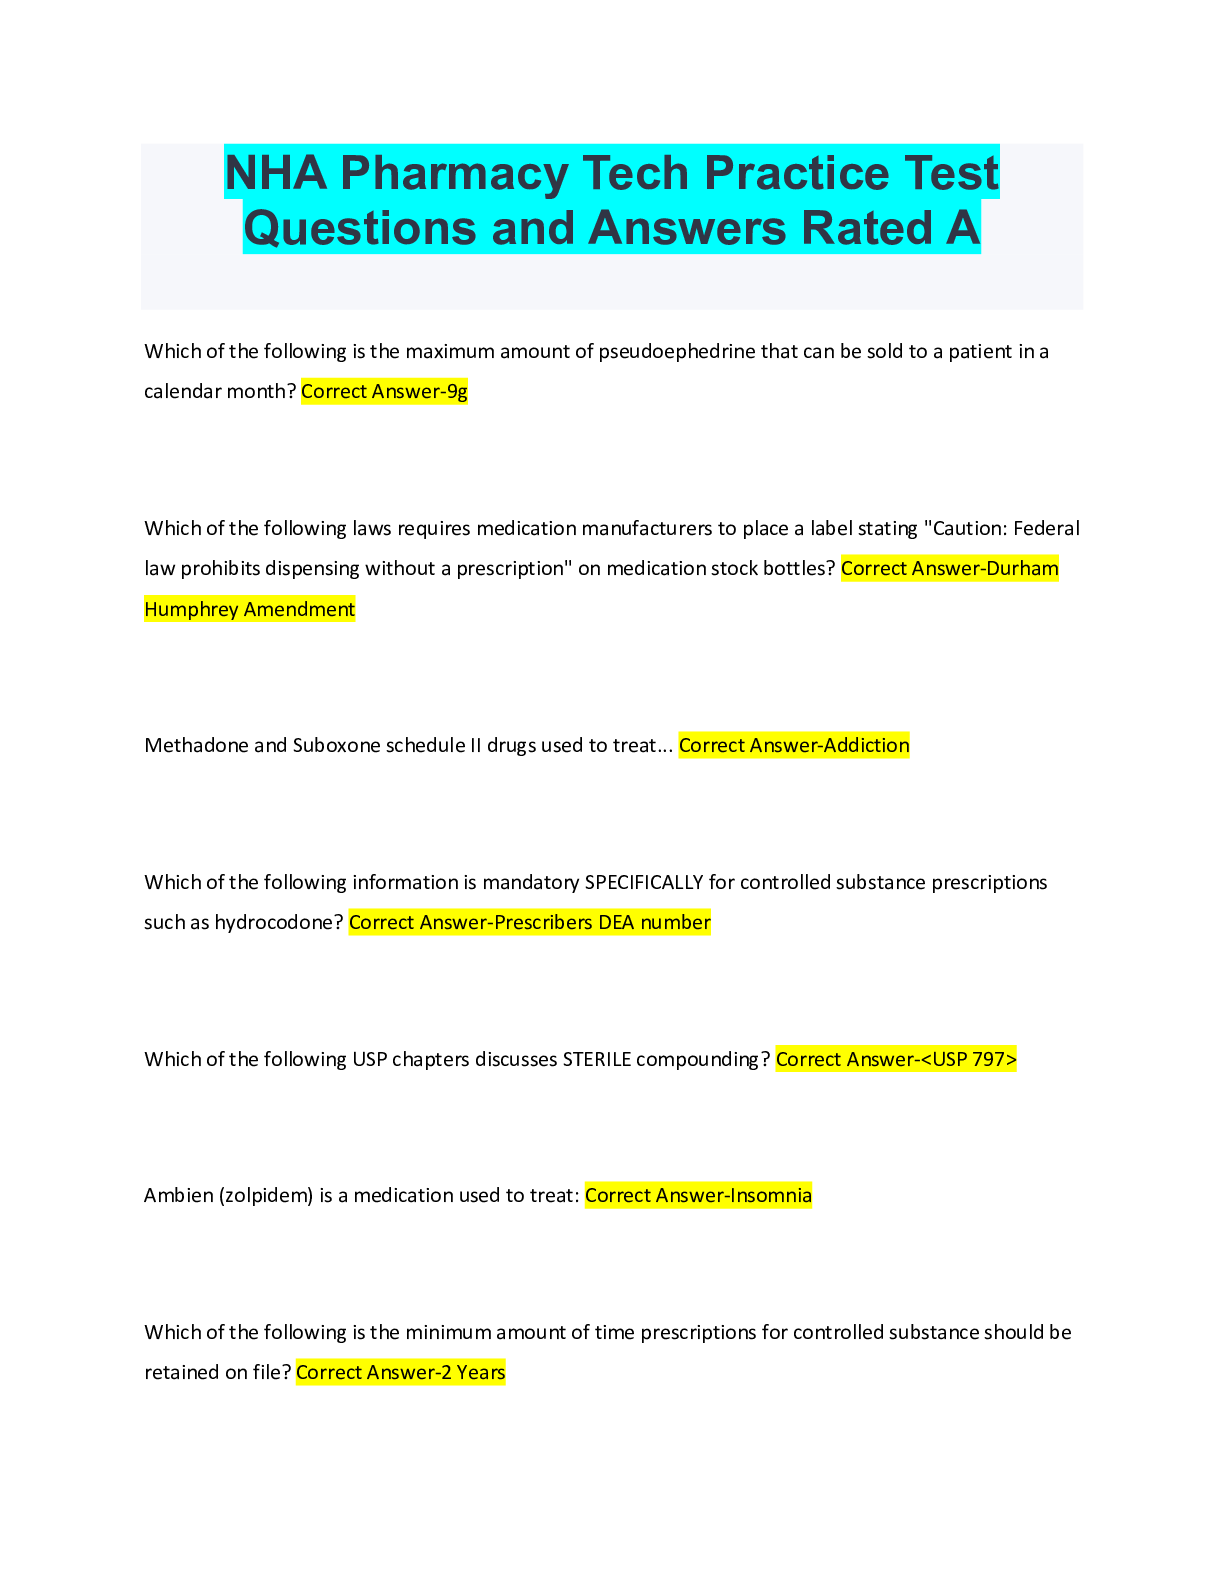 NHA Pharmacy Tech Practice Test Questions and Answers Rated A